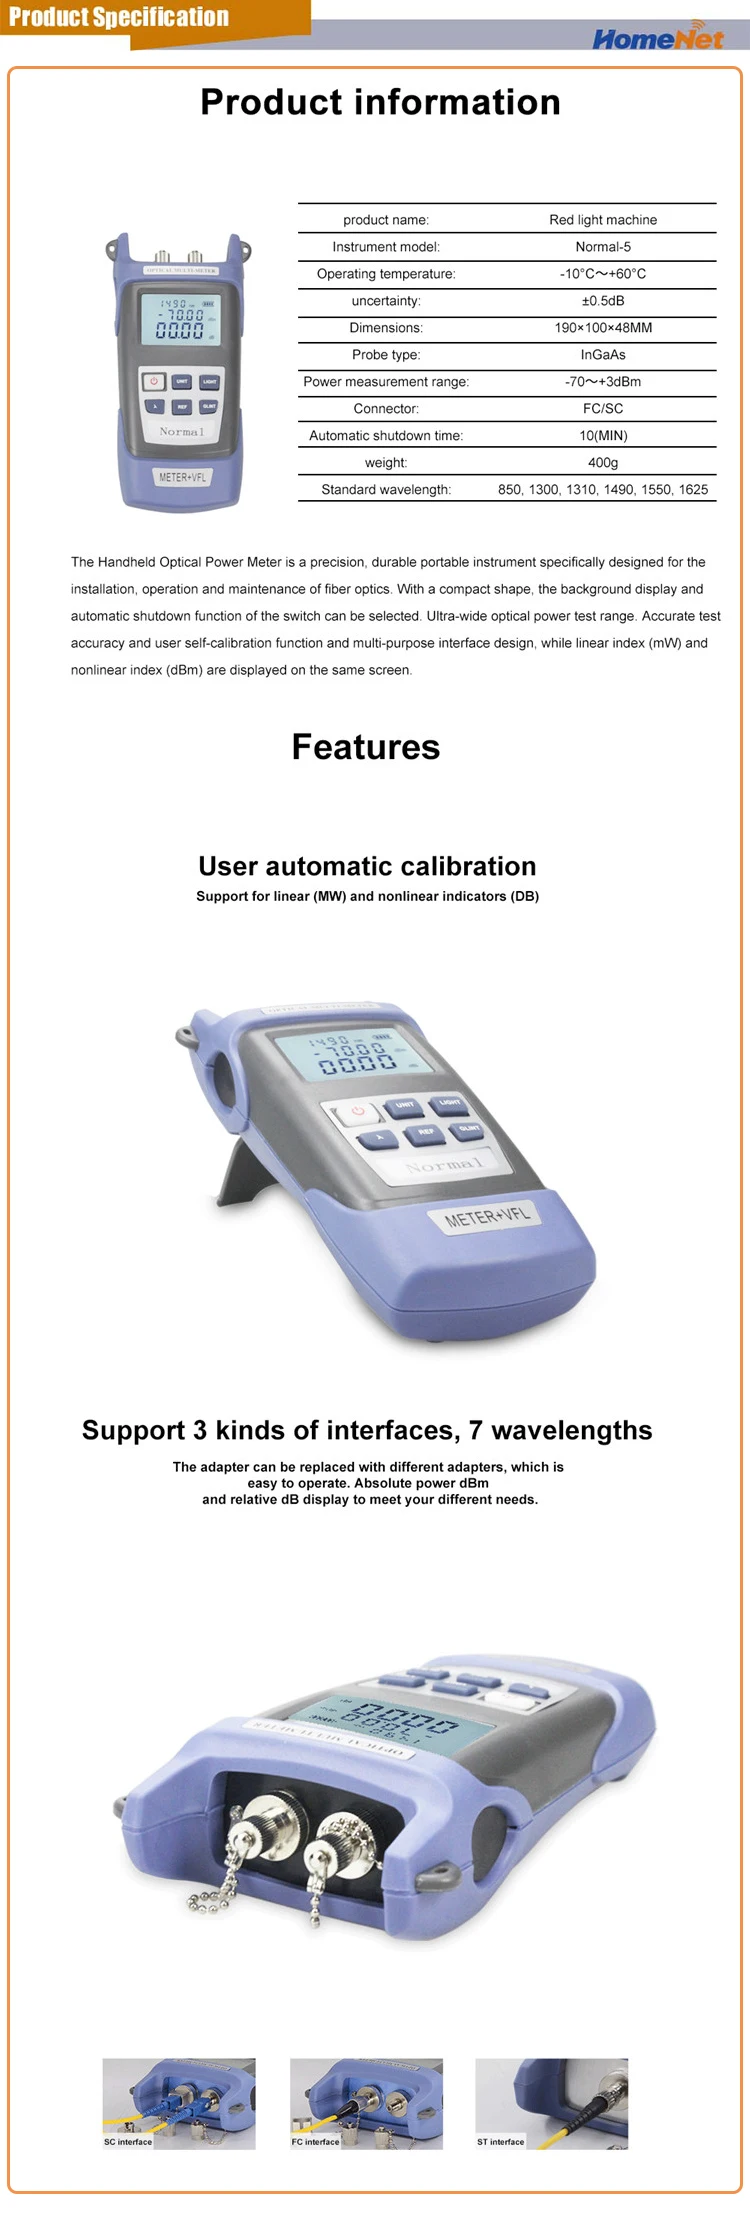 Ftth High precision 2 all-in-one PON Handheld Fiber Optical Power Meter